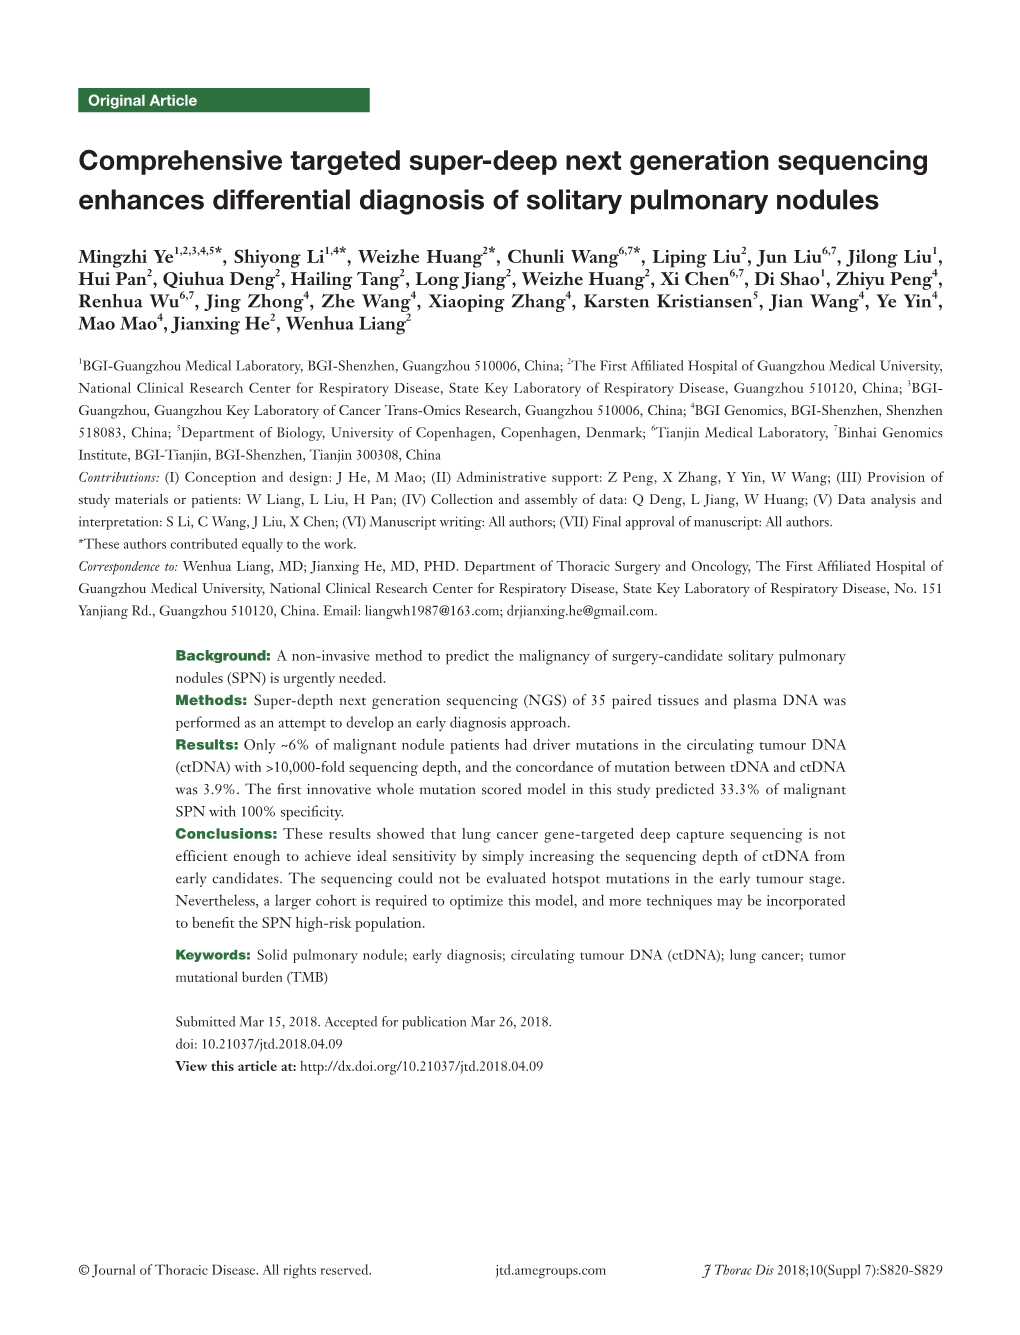 Comprehensive Targeted Super-Deep Next Generation Sequencing Enhances Differential Diagnosis of Solitary Pulmonary Nodules